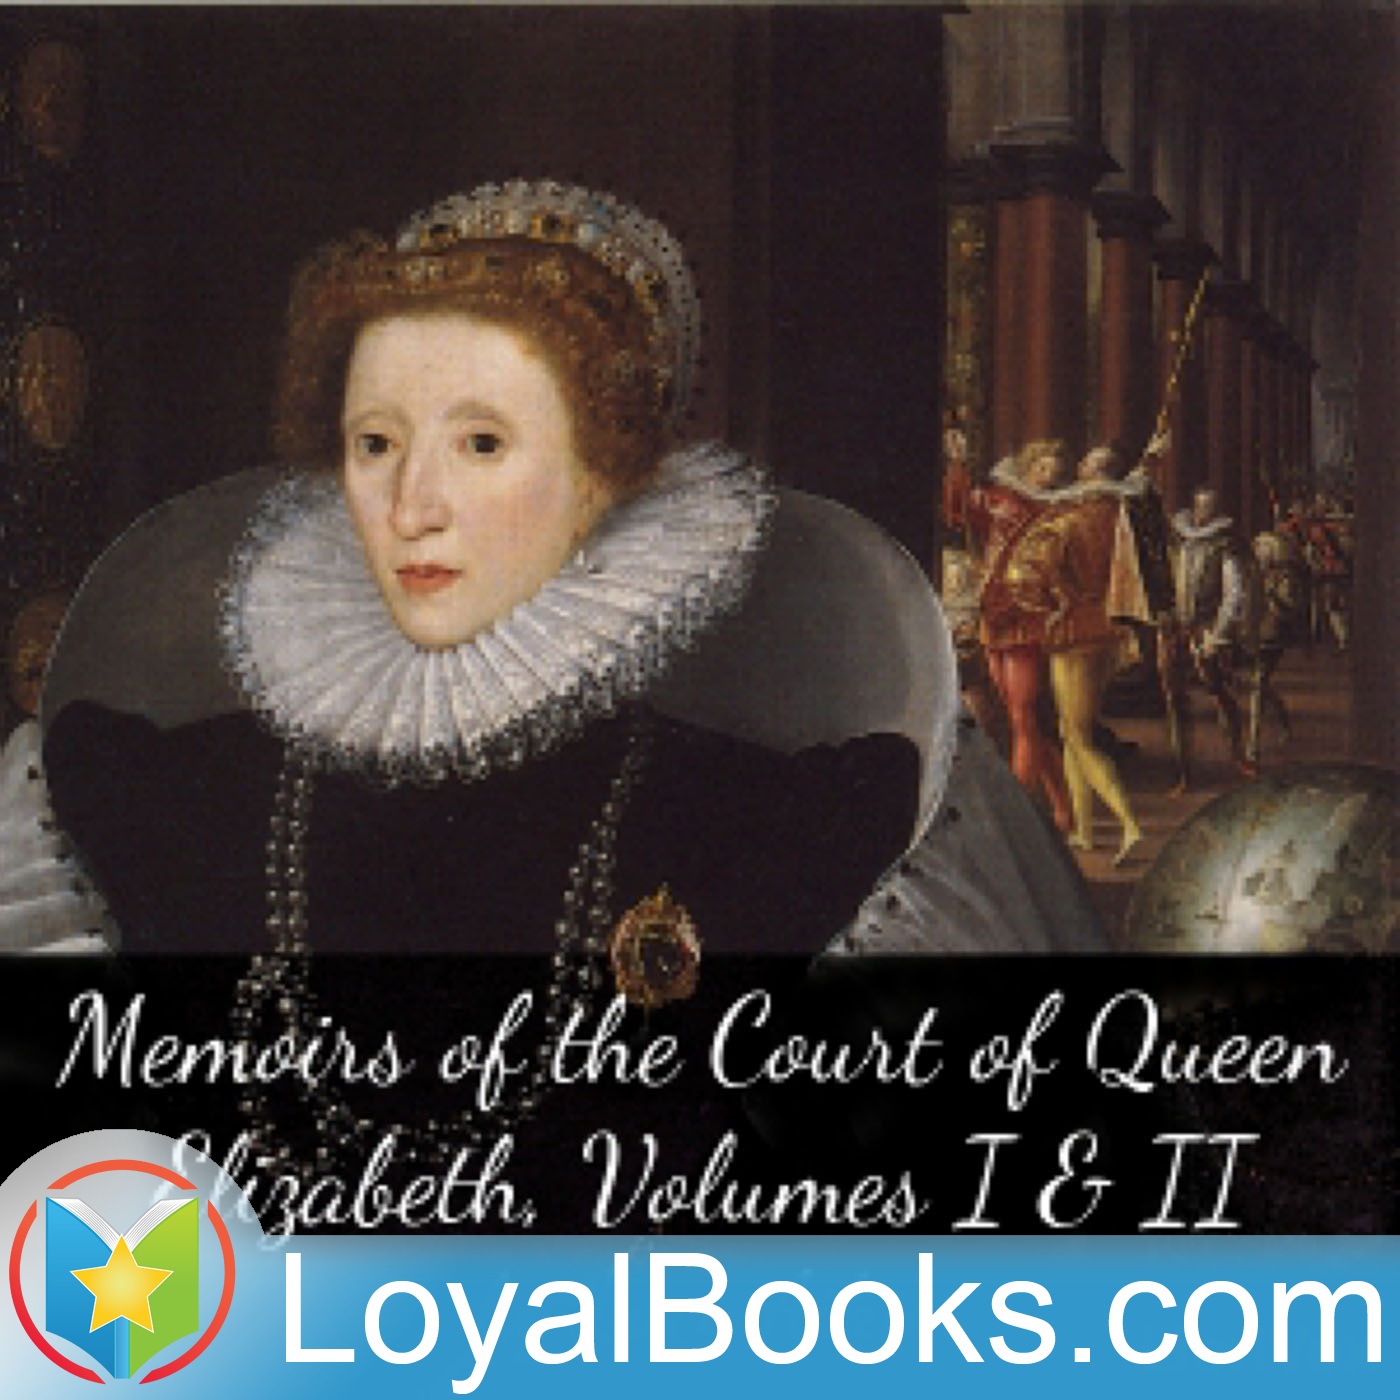 Memoirs of the Court of Queen Elizabeth, Volumes I & II by Lucy Aikin